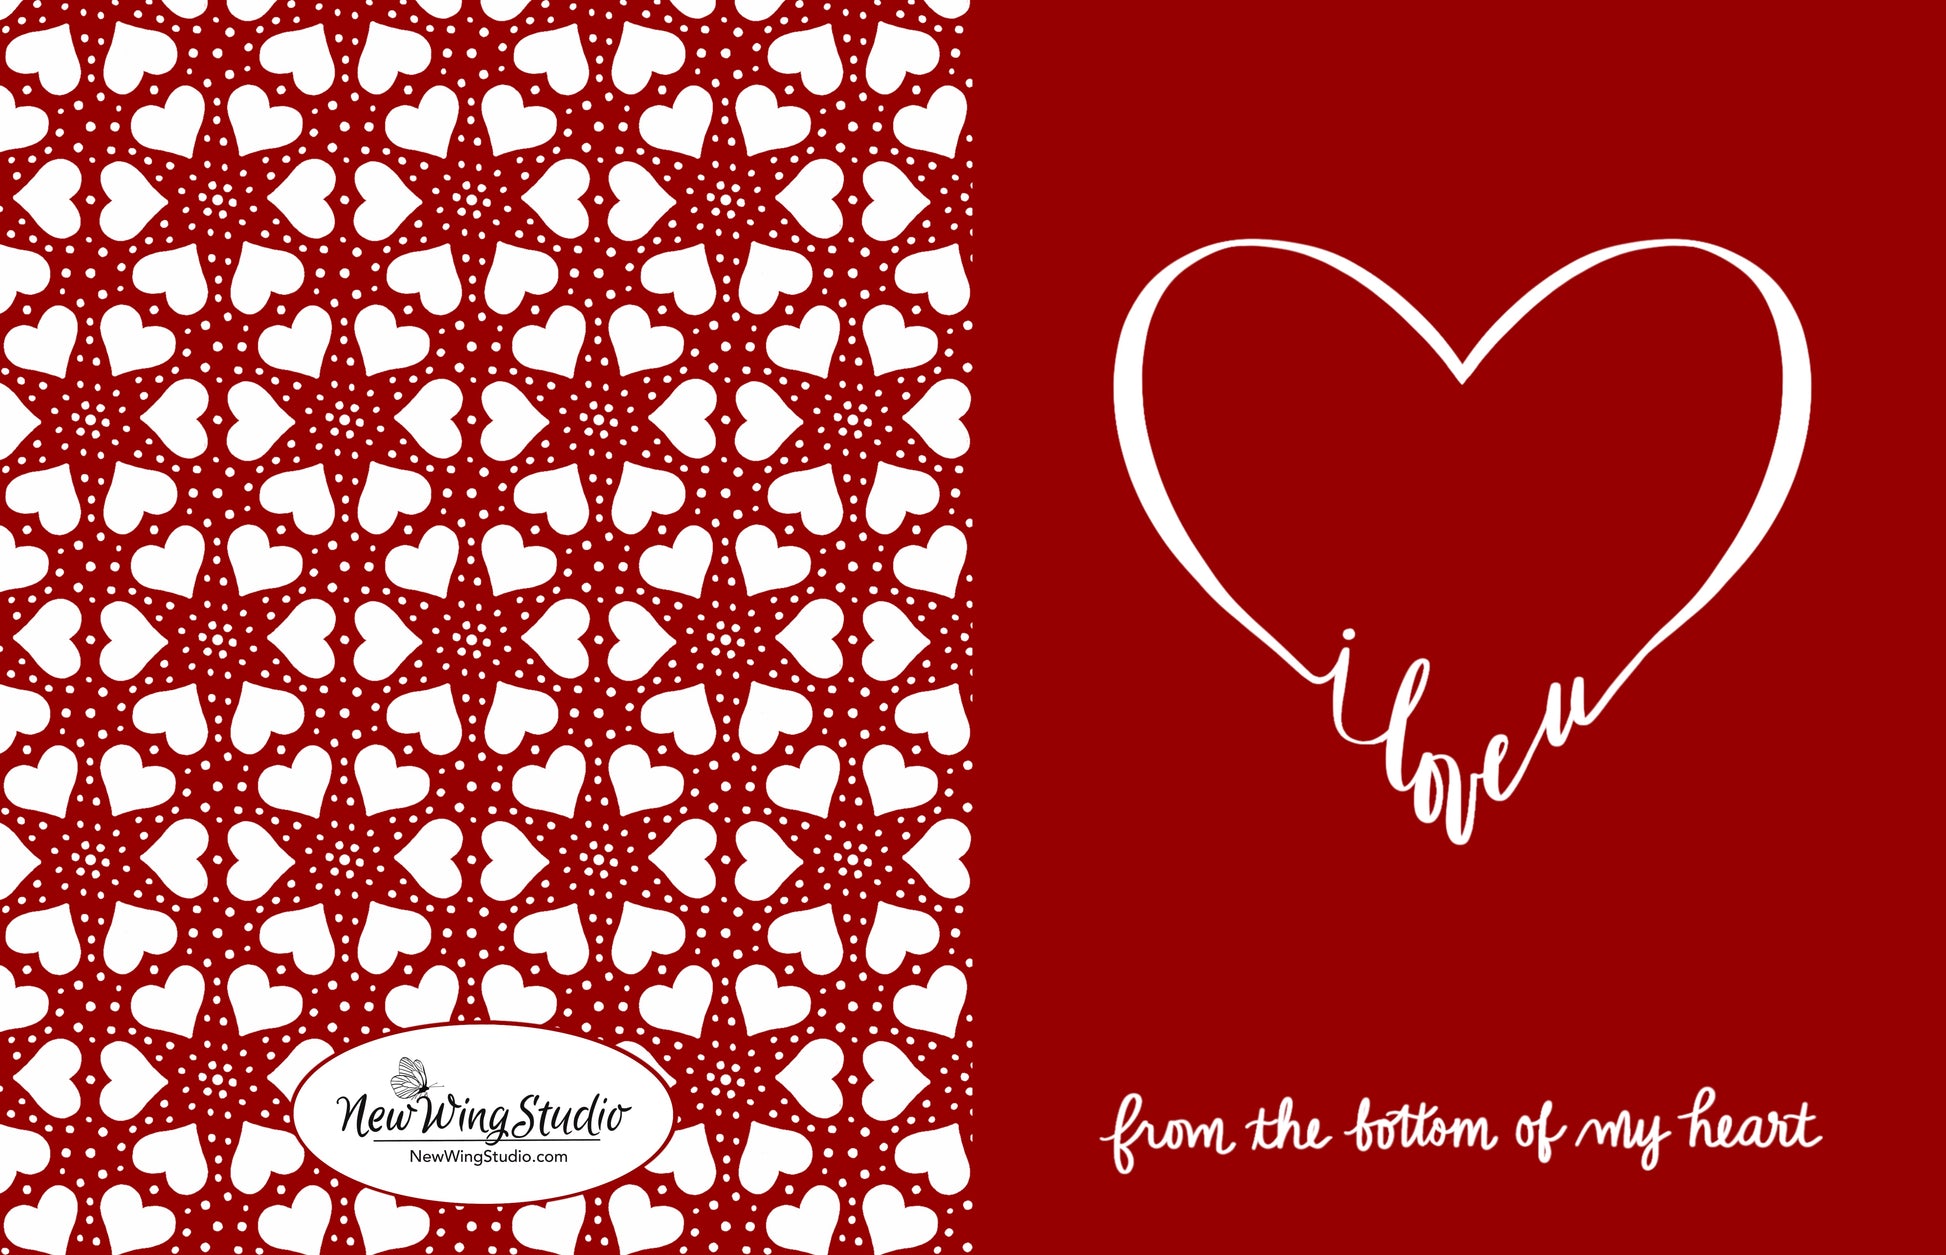 "I Love You From the Bottom of My Heart" is one of our best selling greeting cards and features an elegant hand-drawn heart with the text "I love u" forming the "V" of the bottom of the heart.  The image is featured on a vivid red background and the words "from the bottom of my heart" are printed in messy handwriting below.  The back of the card features an adorable pattern of hearts and dots.  All of our original artwork is created by Jennifer Knight.  Newwingstudio.com